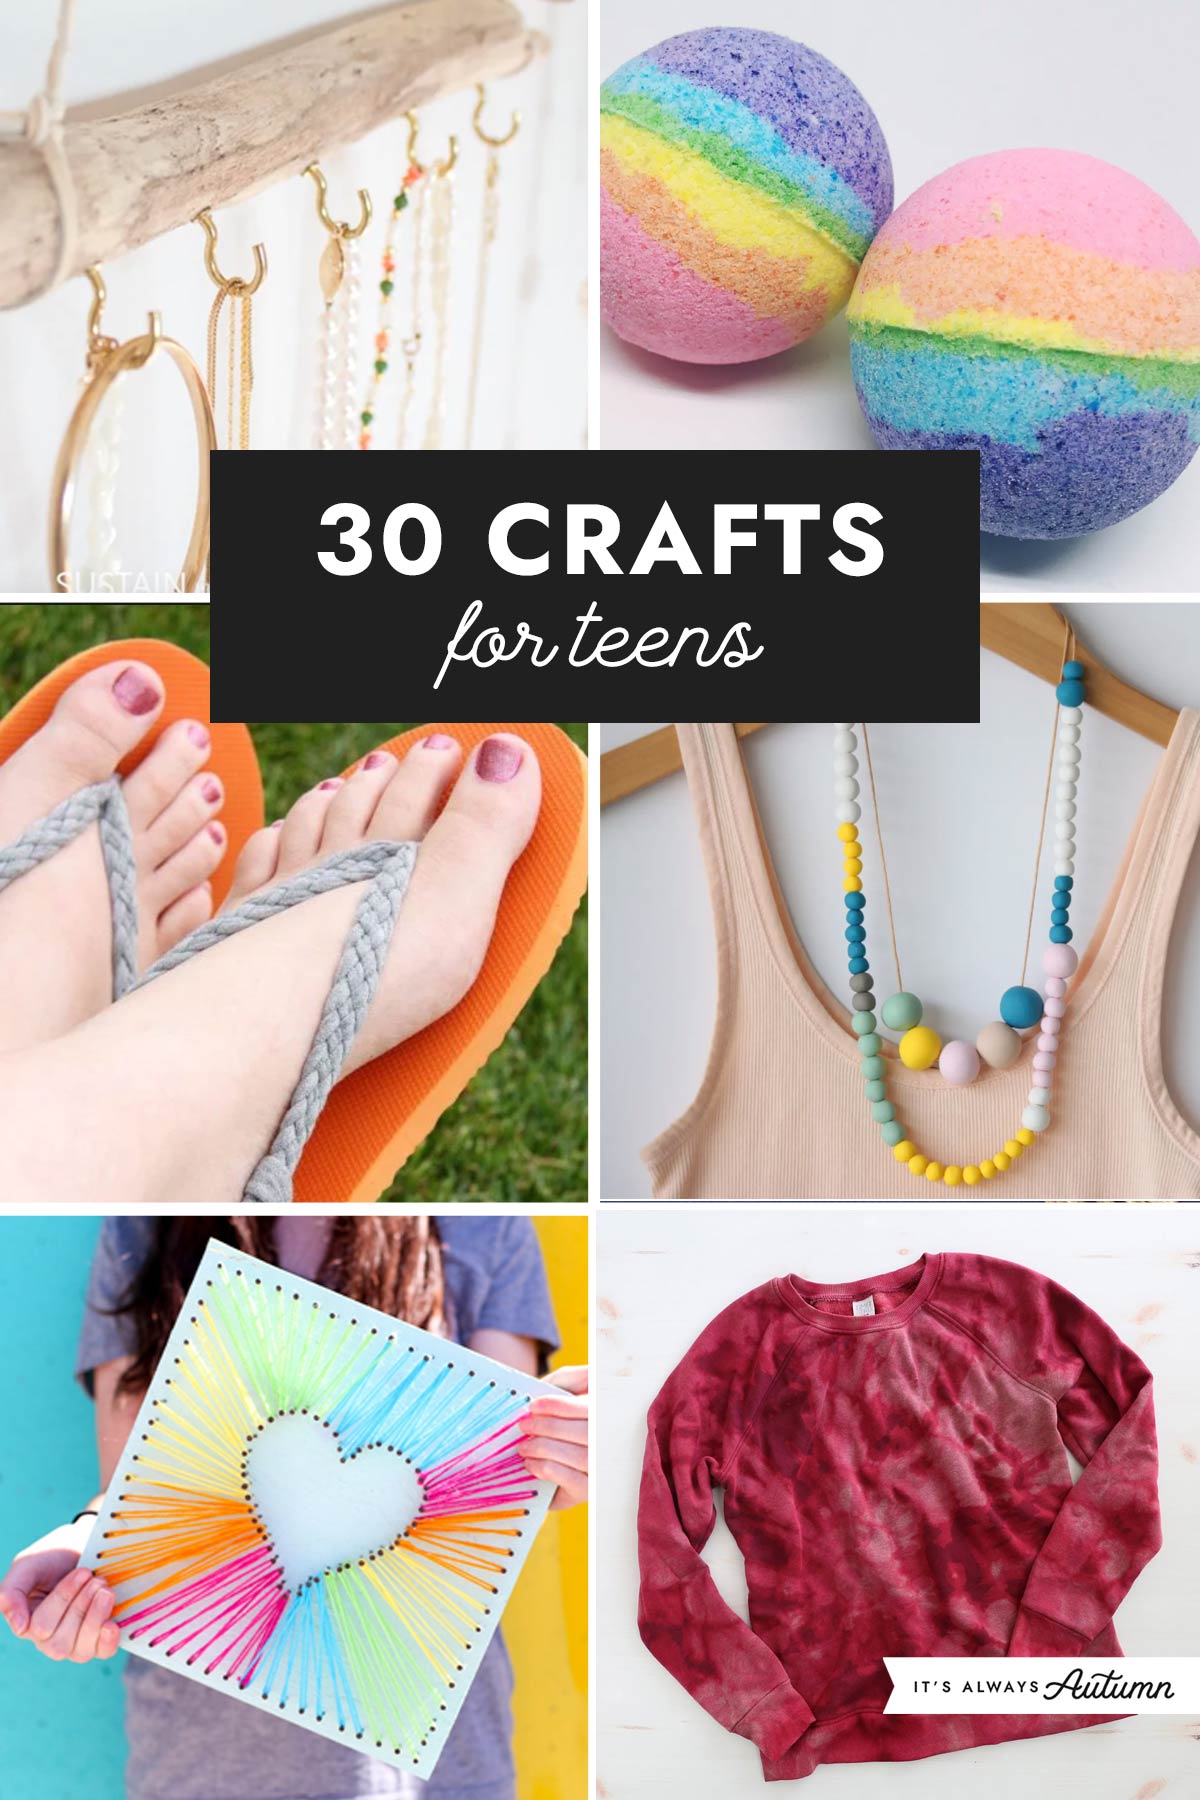 Paper Crafts for Kids: 30 Fun Projects You'll Want to Try - Frugal